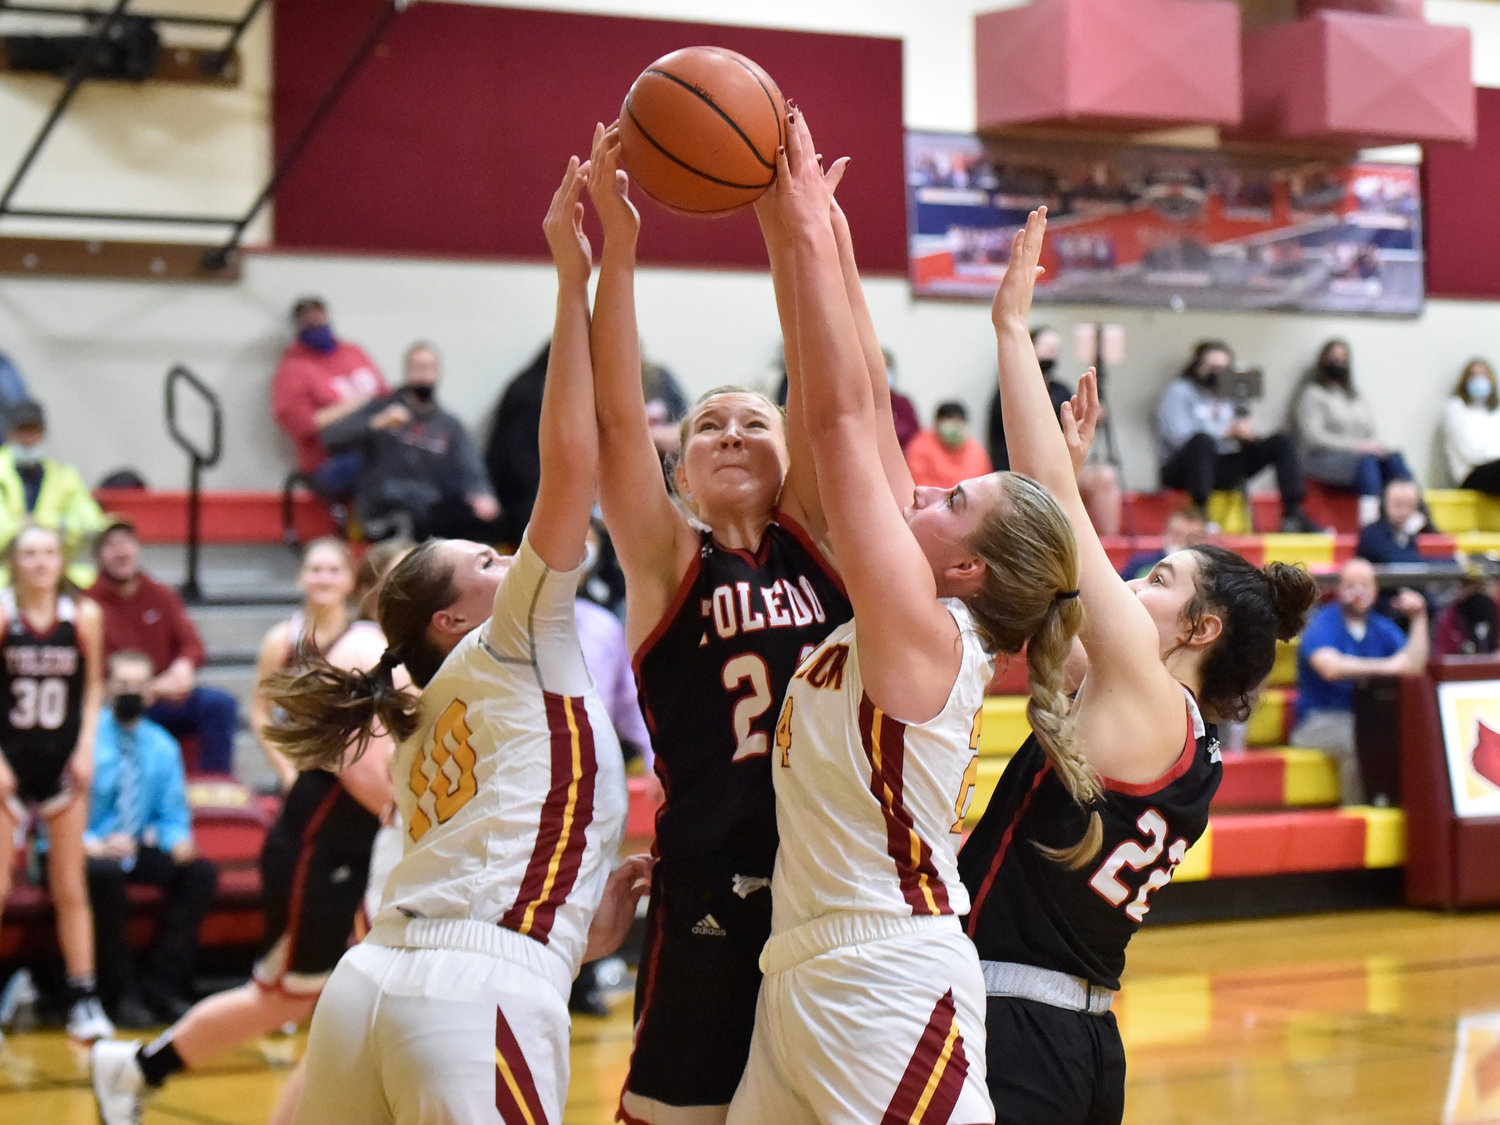 Toledo’s Greenlee Clark (24) is surrounded by multiple players while attempting to grab a rebound against Winlock on Wednesday, Jan. 5, in Winlock.